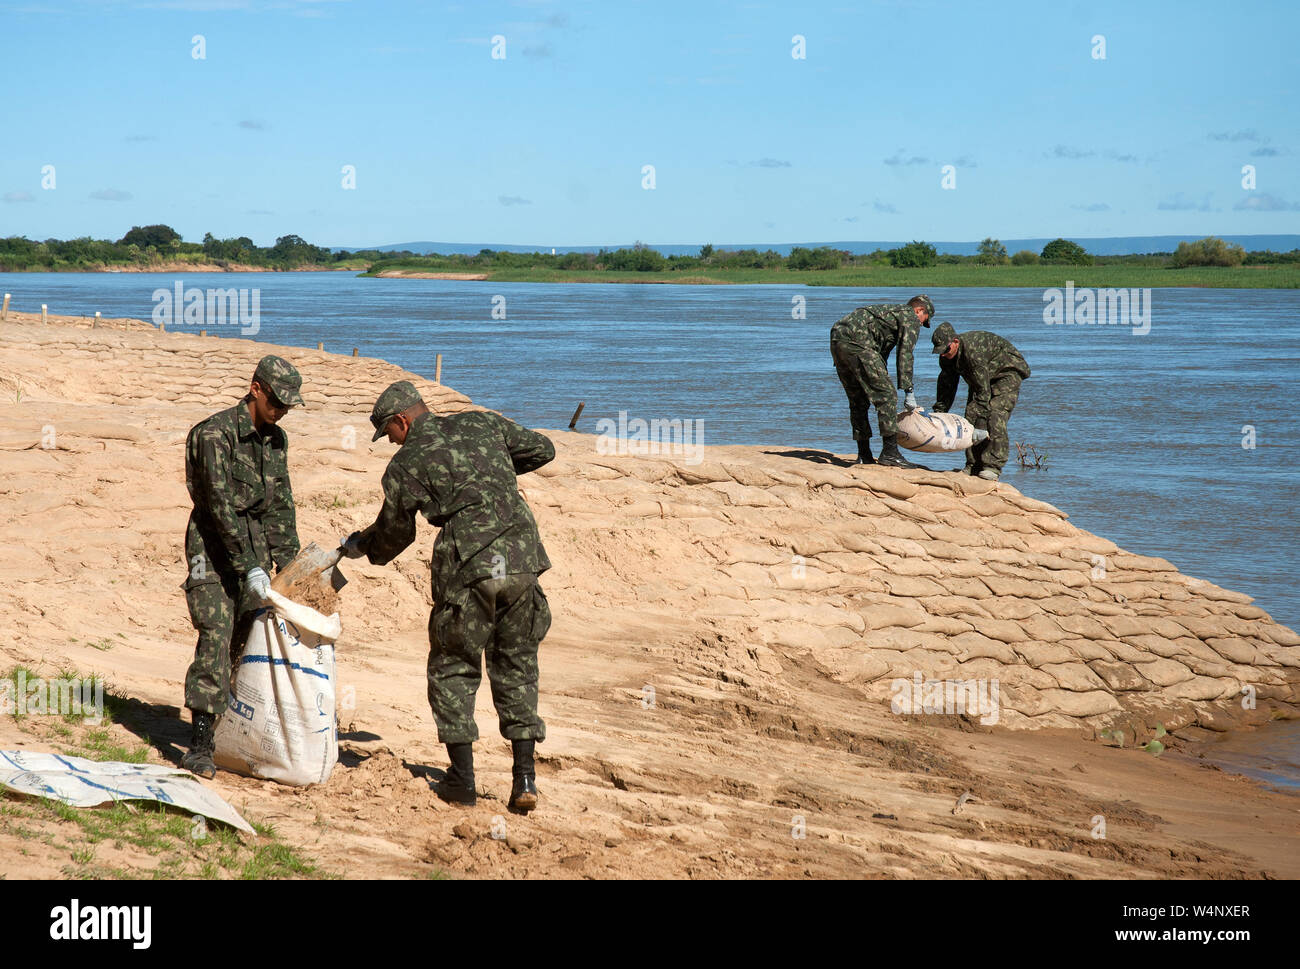 Bahia, September 23, 2006. Army soldiers making sandbag barriers to try to contain the landslide on the banks of the São Francisco river in the wester Stock Photo